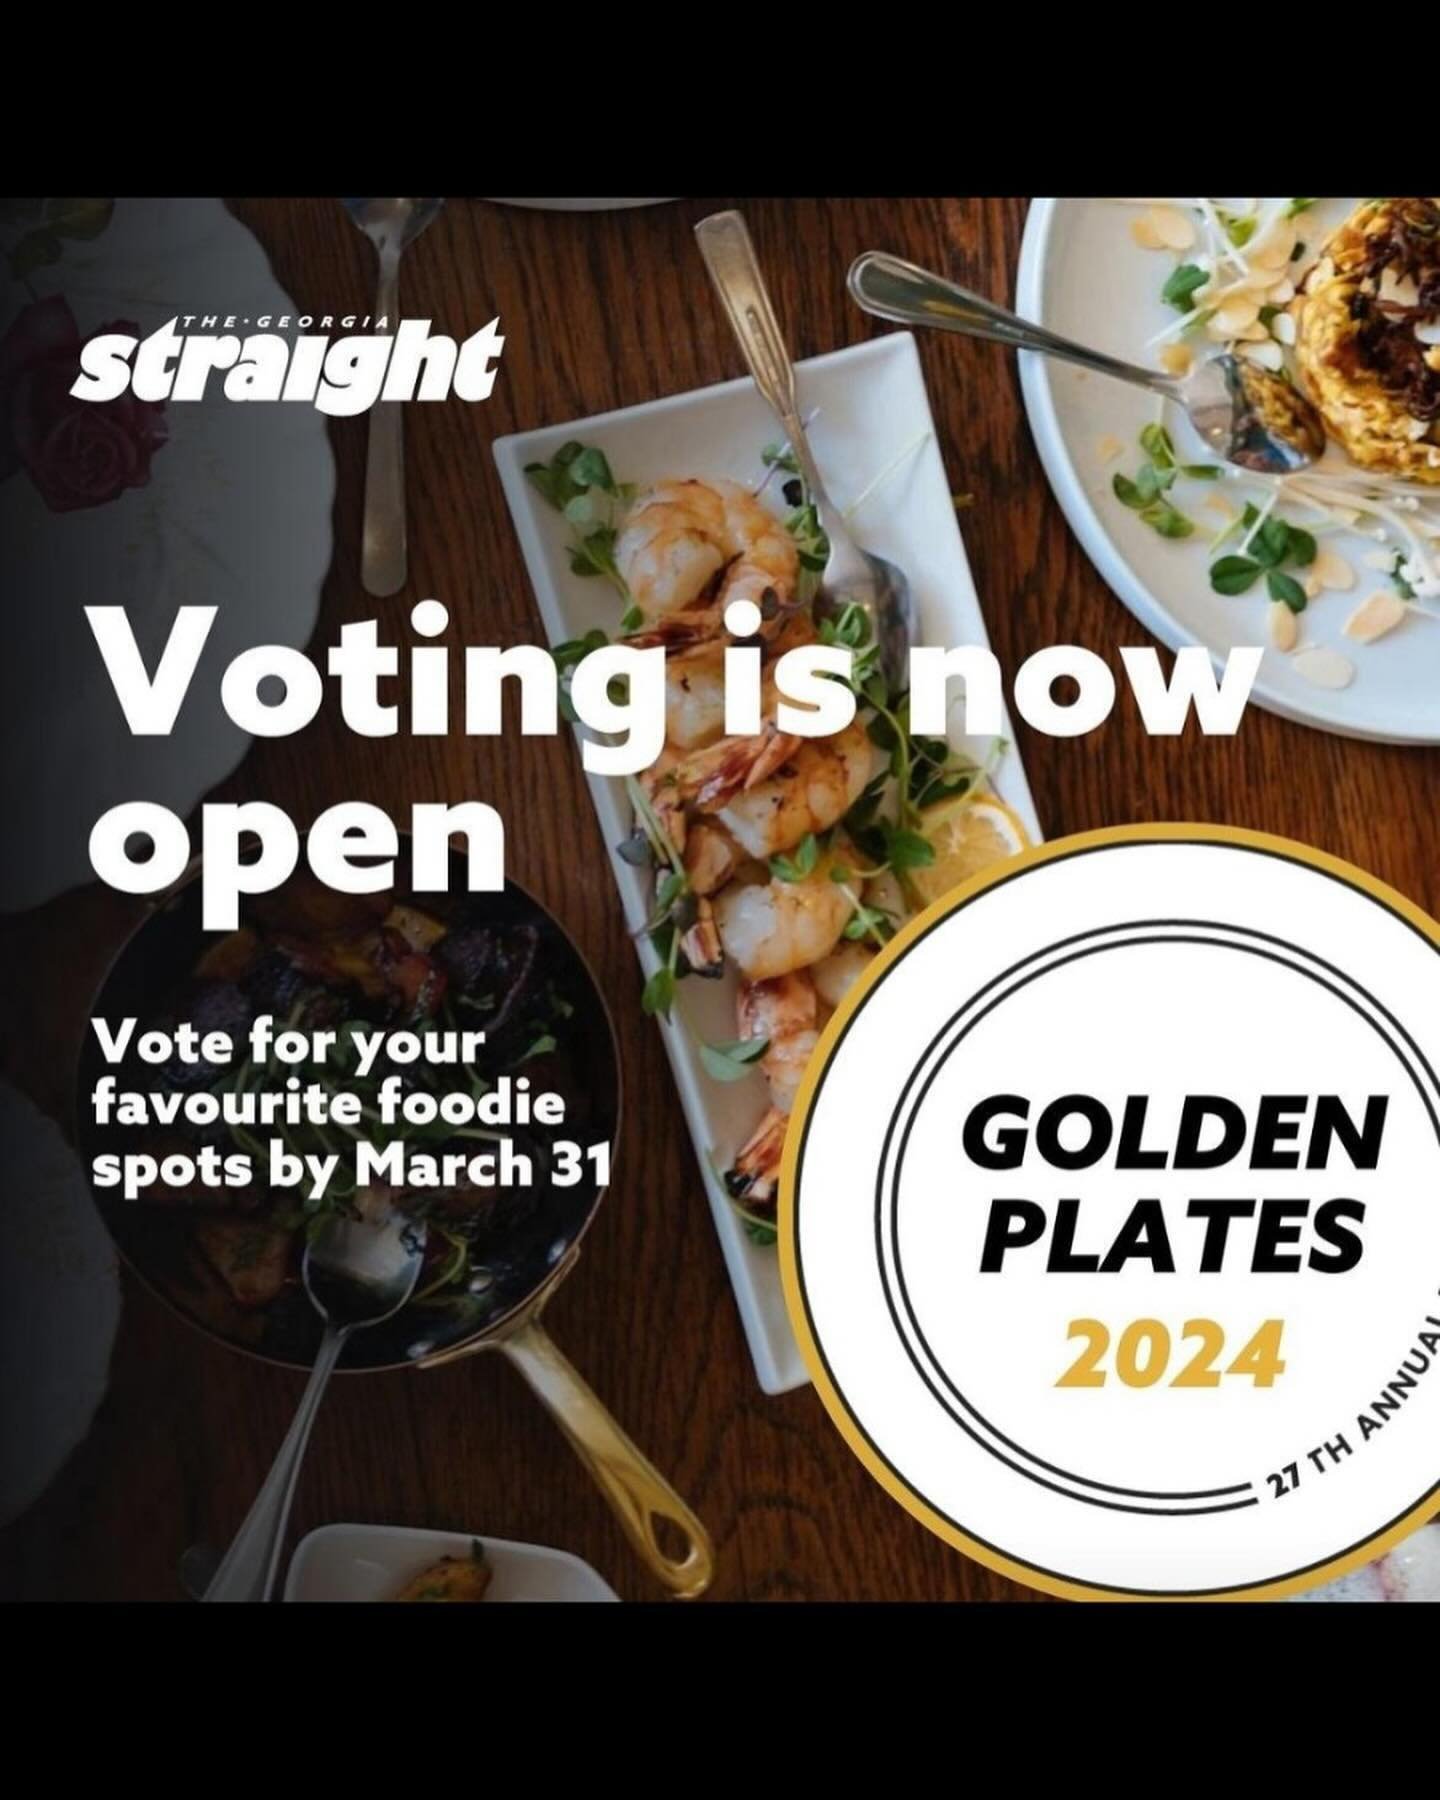 Wow! What a great month it&rsquo;s been! First being nominated by @vanmag_com for best food truck and now a finalist for @georgiastraight for best food truck and best catering company. Voting is open until March 31st. We appreciate all the support ev